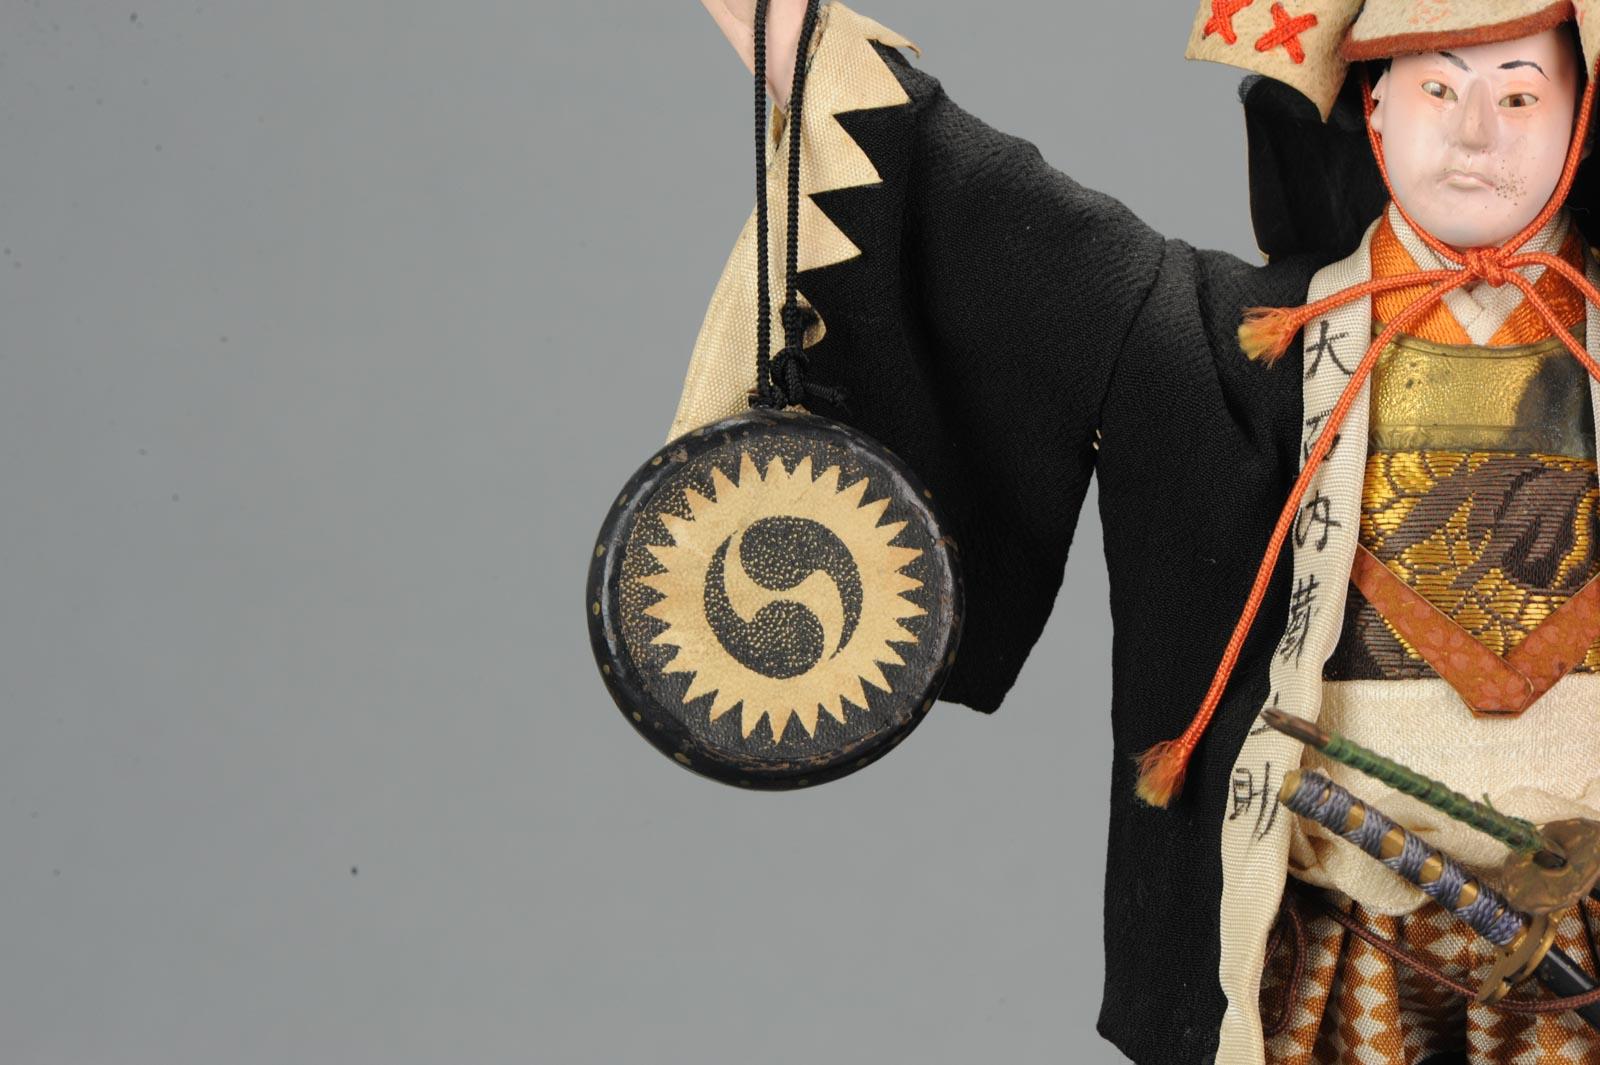 Lovely Japanese Ningyo Doll, Tanaka Doll, Samurai Warrior, 19th-20th Century In Fair Condition For Sale In Amsterdam, Noord Holland